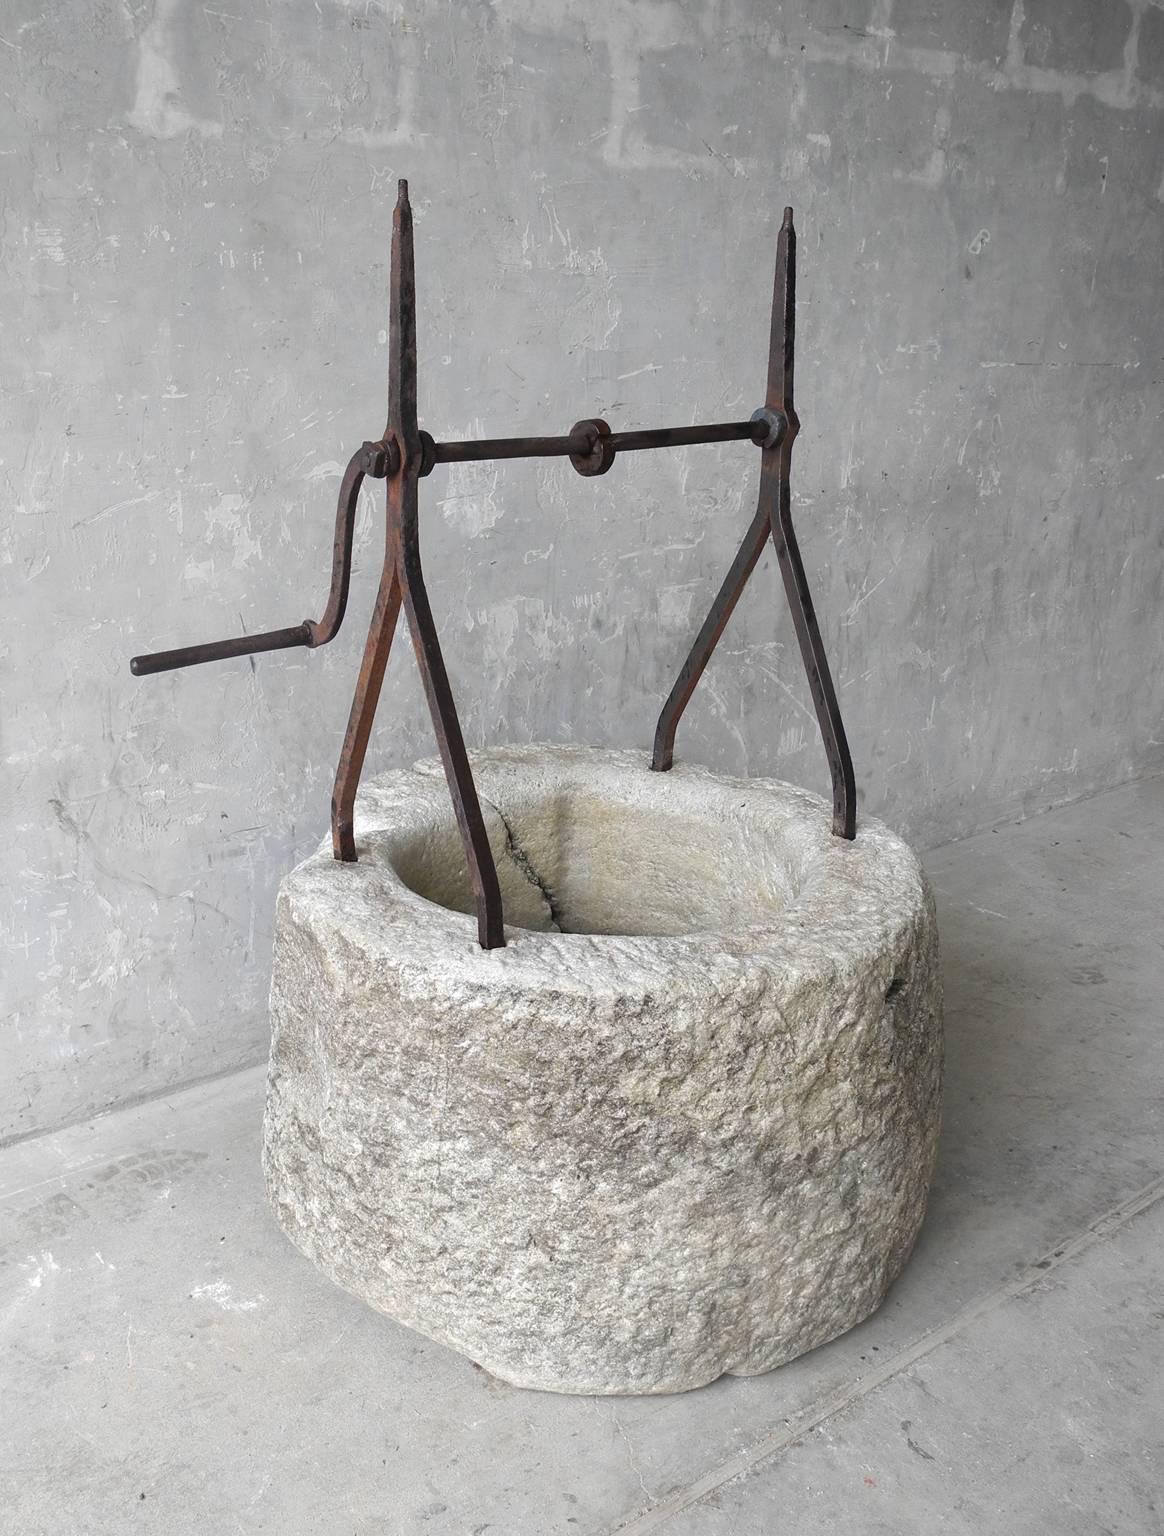 This is a small and darling antique 17th century stone well from the courtyard of a house in Imola, a town in the Emilia-Romagna region of Italy. It is elegantly simply and makes for a wonderful addition to any garden space. It has a sturdy and